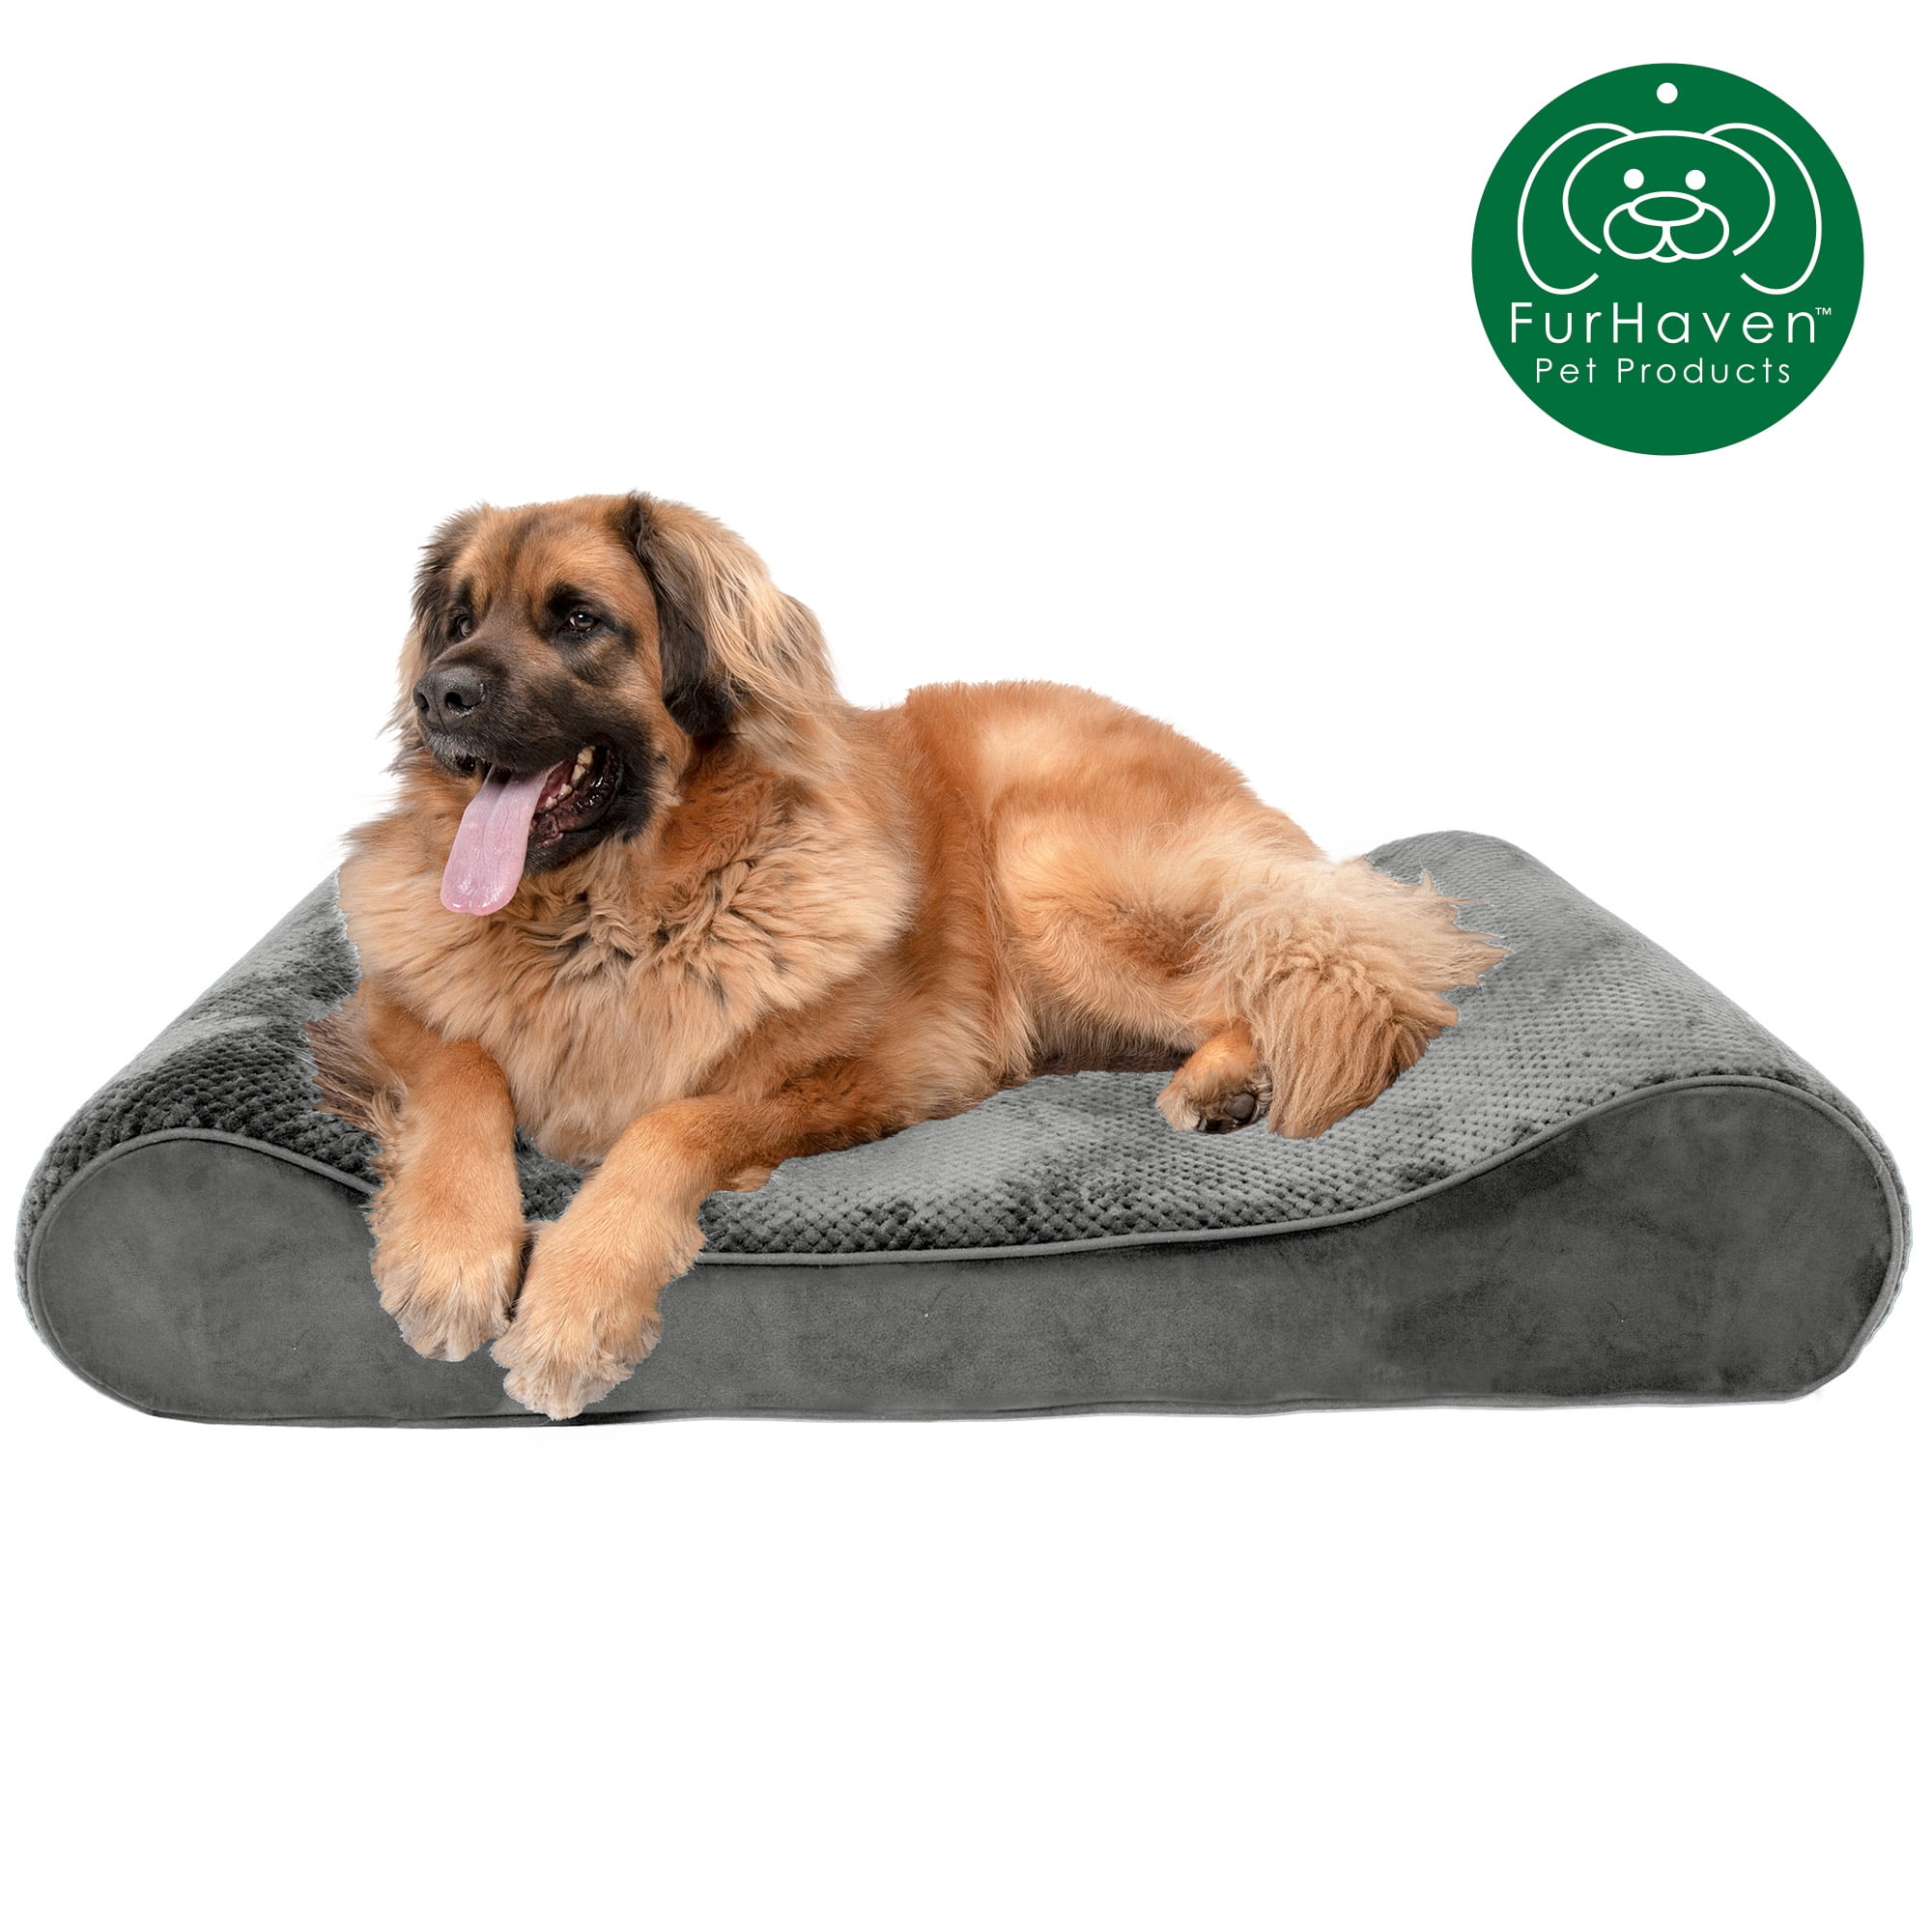 Furhaven Pet Dog Bed Orthopedic Ergonomic Luxe Lounger Cradle Mattress Pet Bed w/ Removable Cover for Dogs & Cats Available in Multiple Colors & Styles 